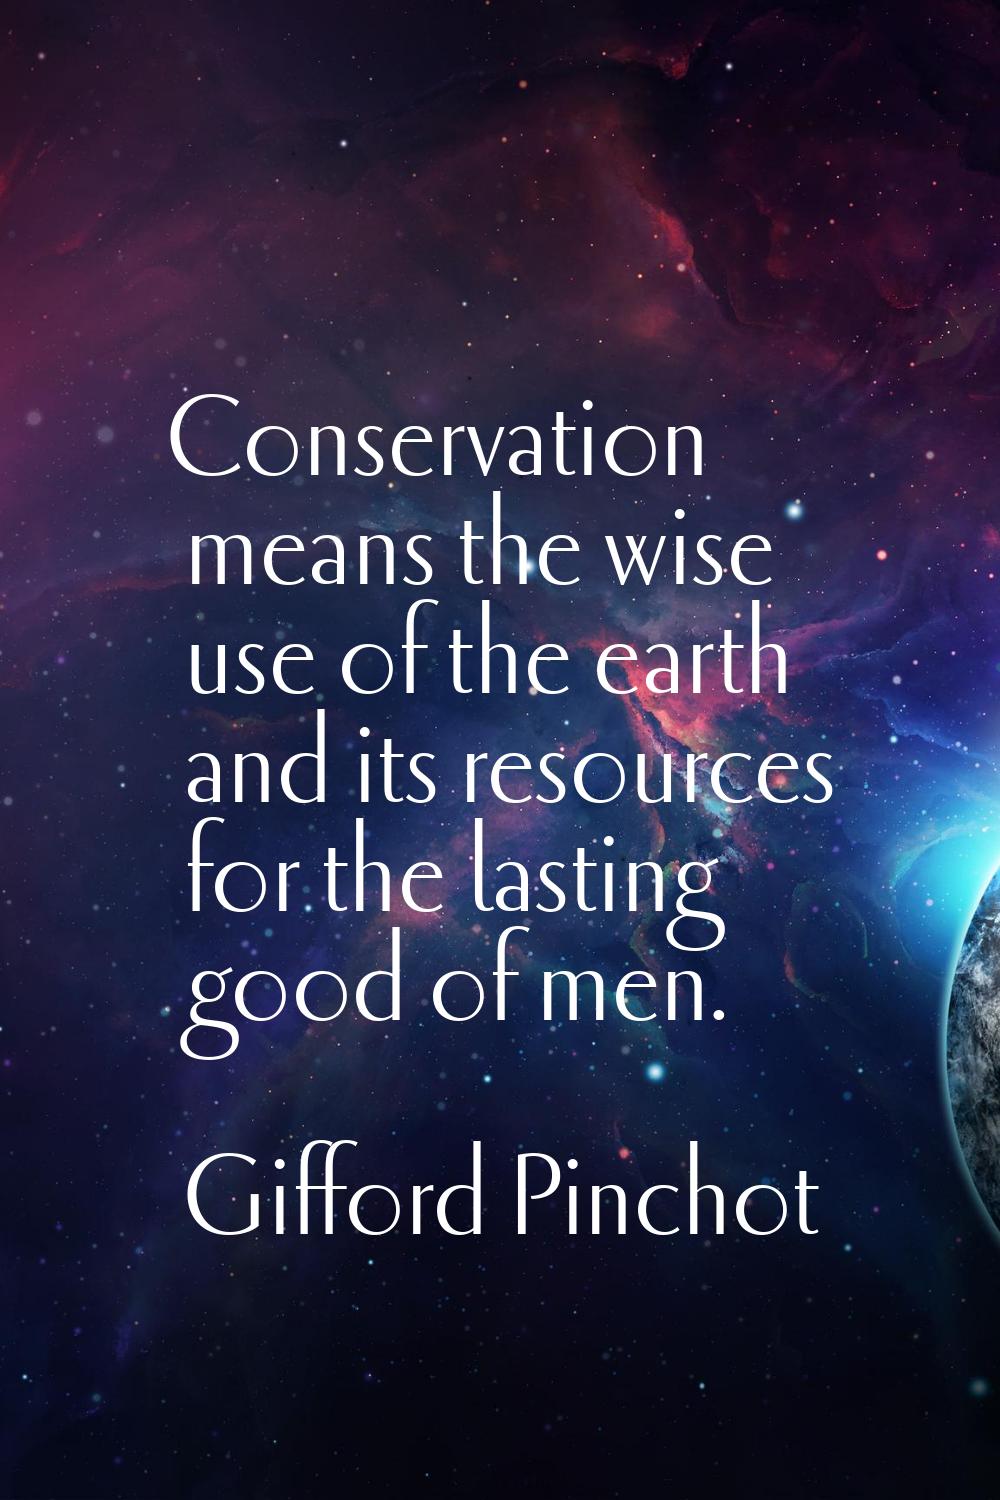 Conservation means the wise use of the earth and its resources for the lasting good of men.